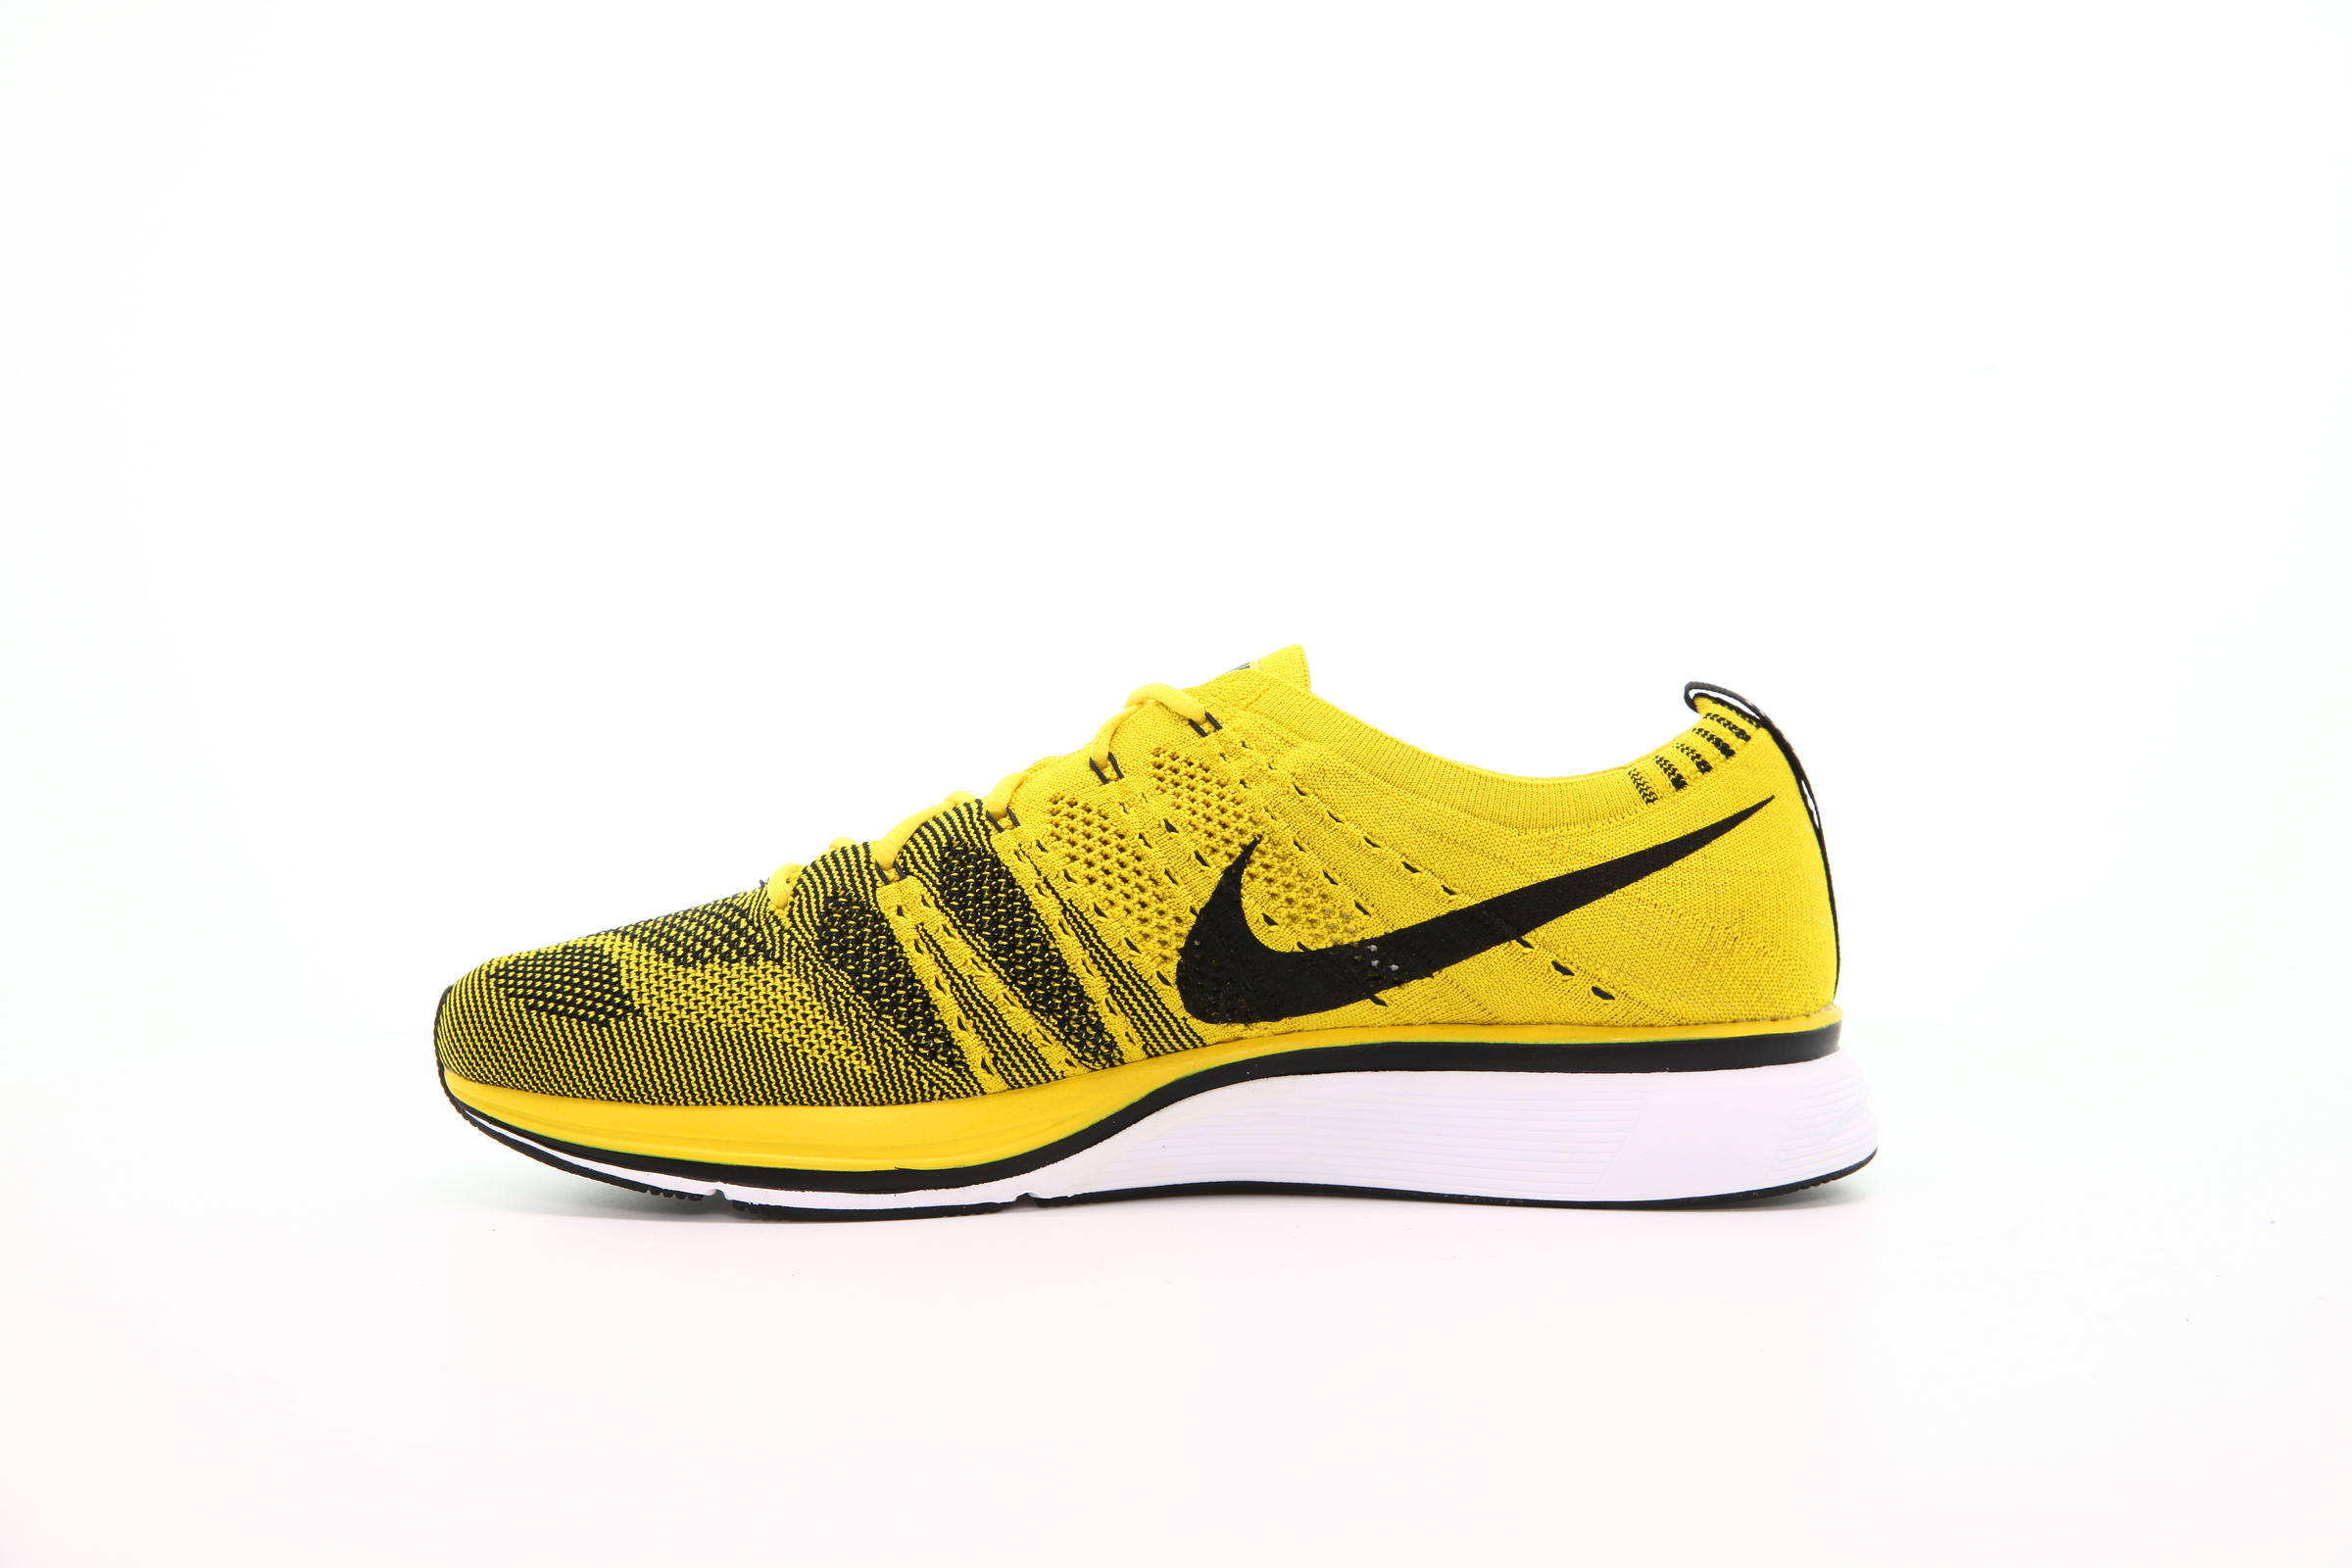 Nike Flyknit Trainer "Bright Citron"